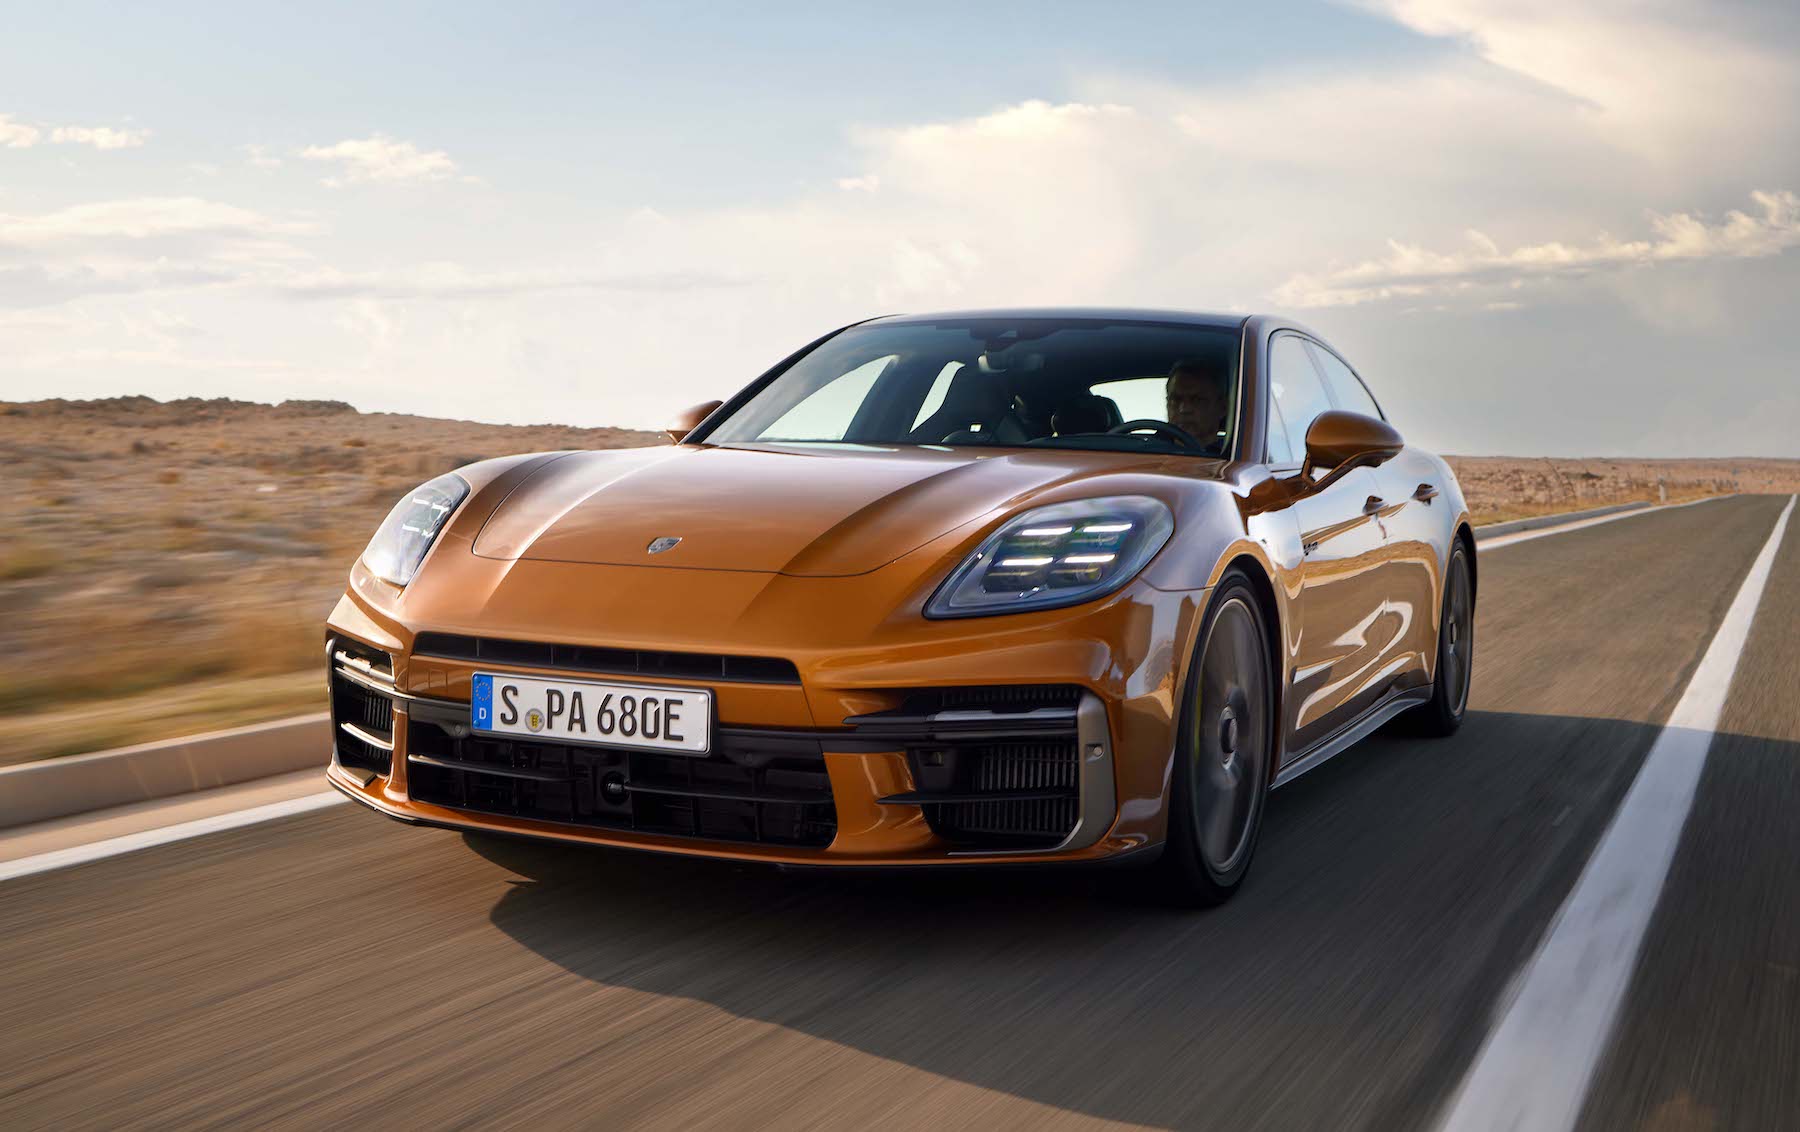 New Porsche Panamera Revealed with Trick Suspension and E-Hybrid Power